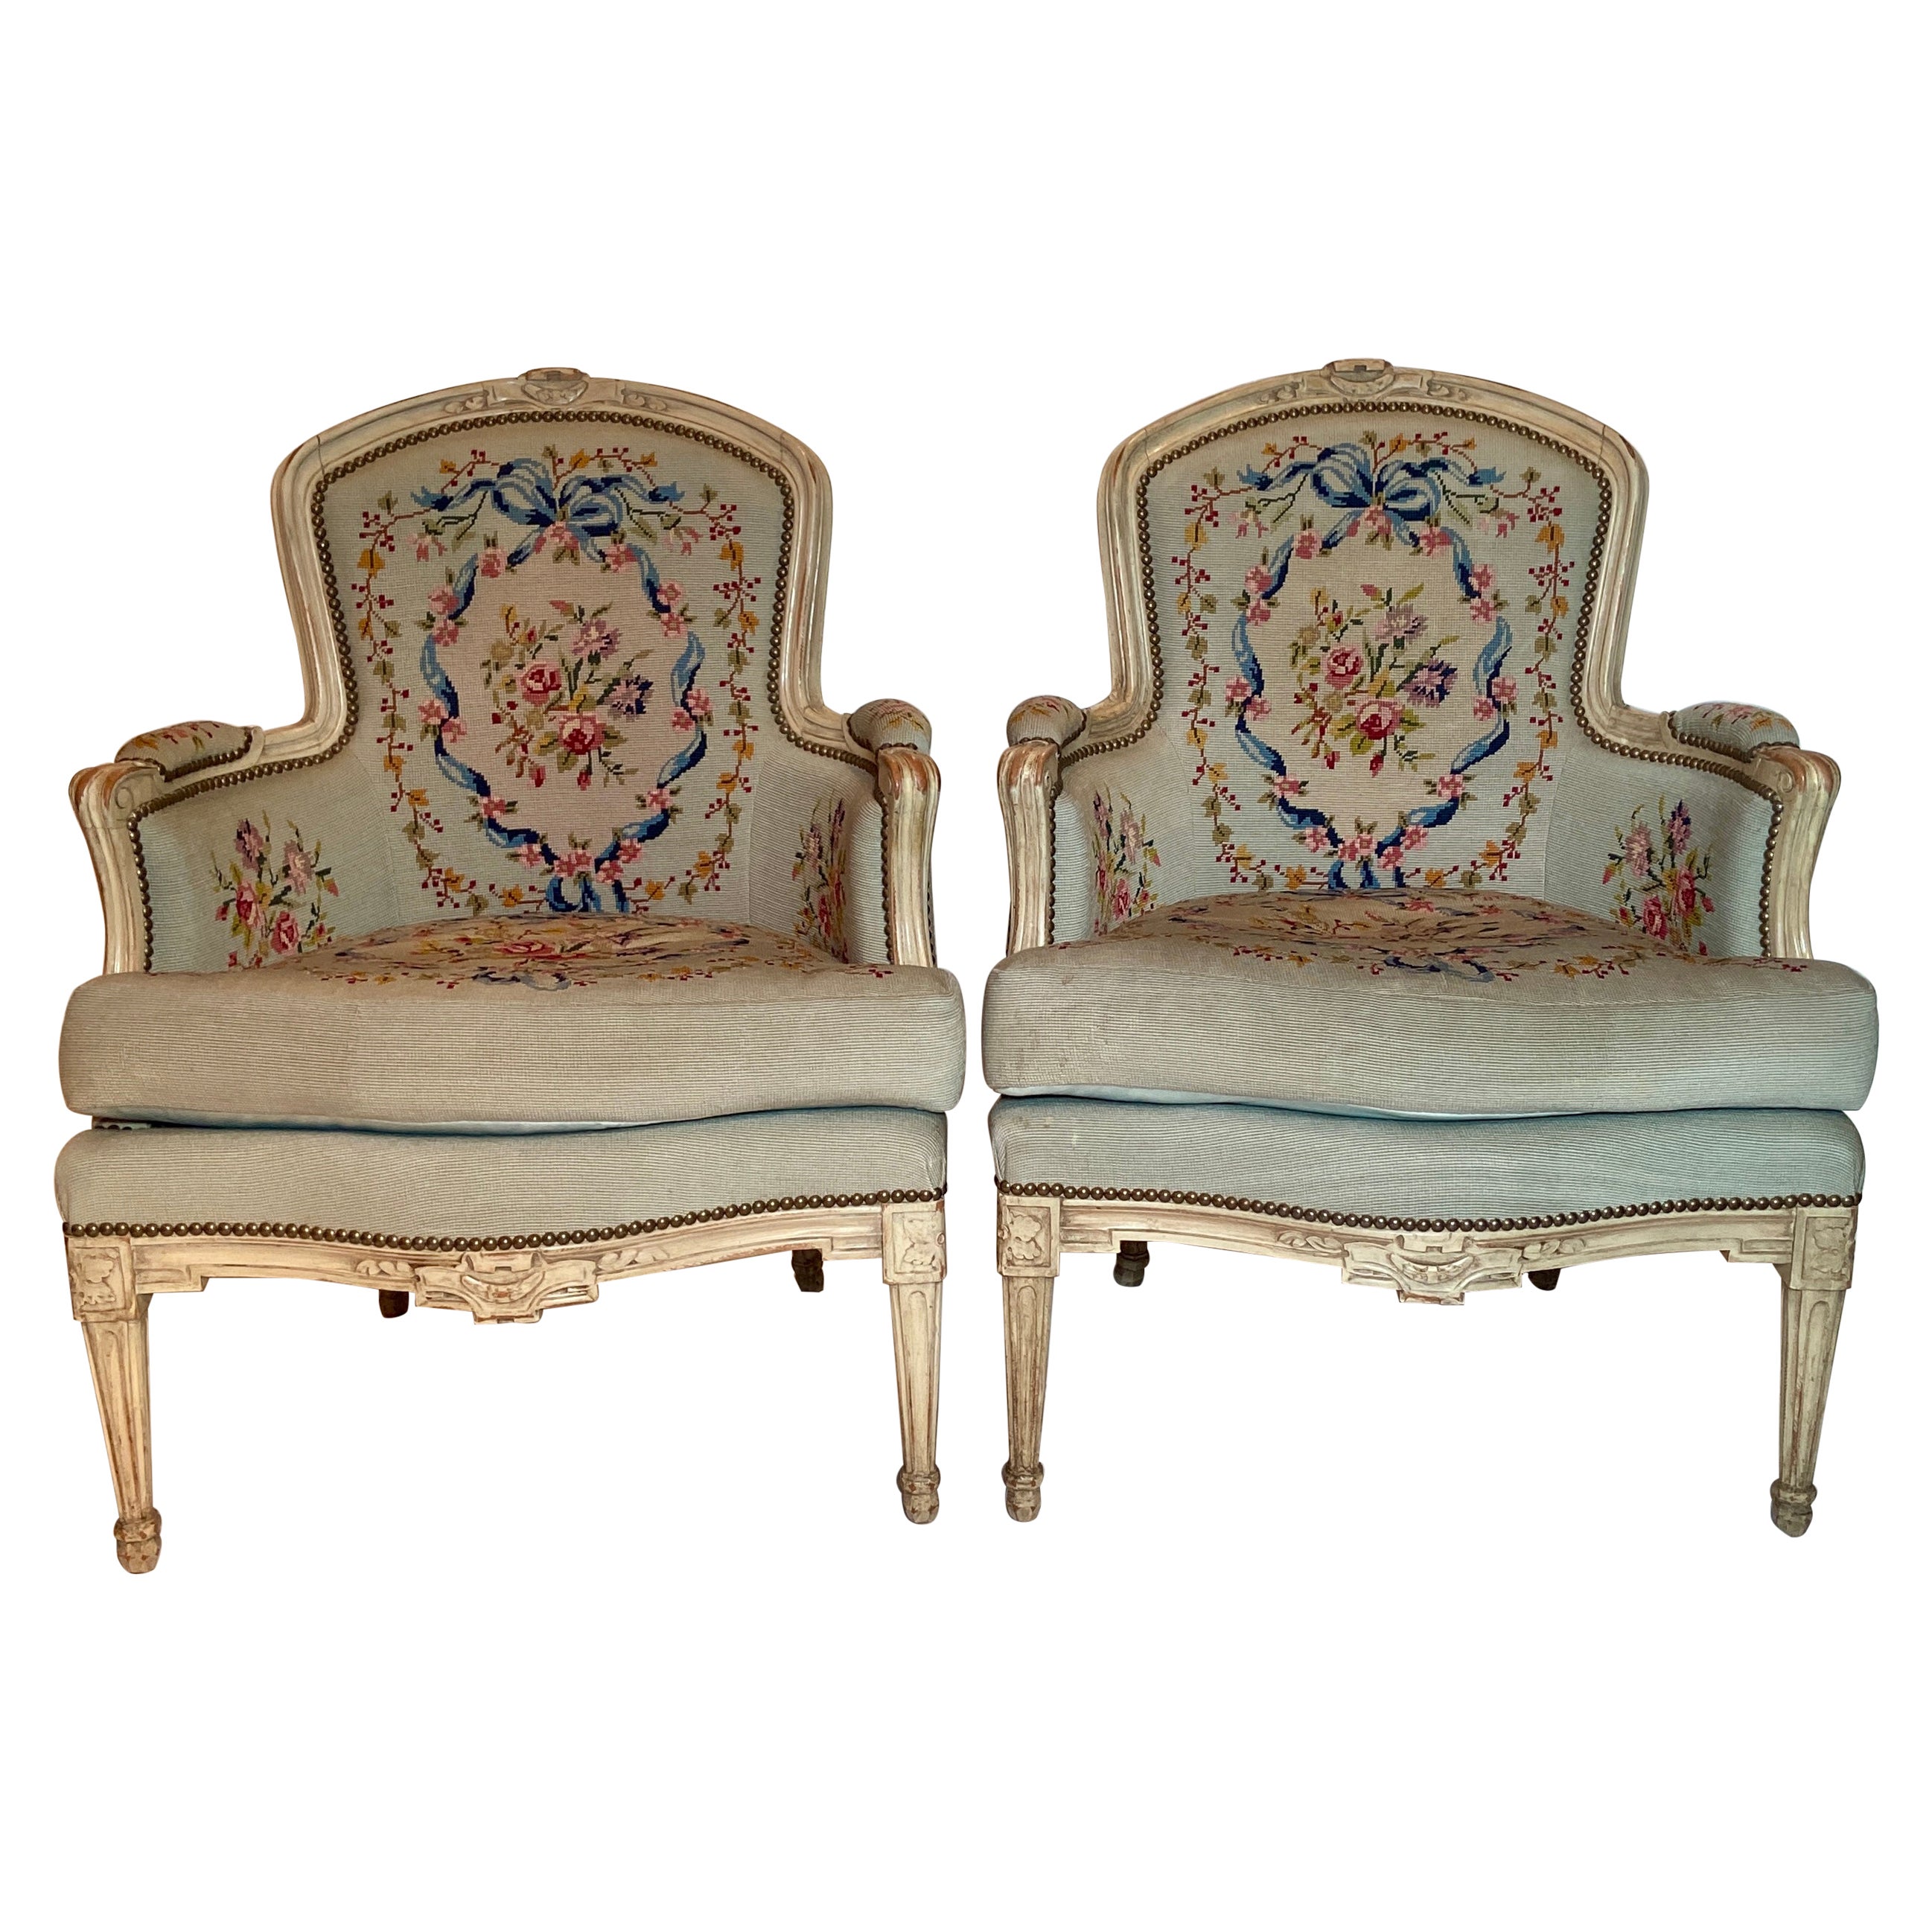 Pair Antique French Painted Carved Walnut & Needlepoint Upholstered Armchairs